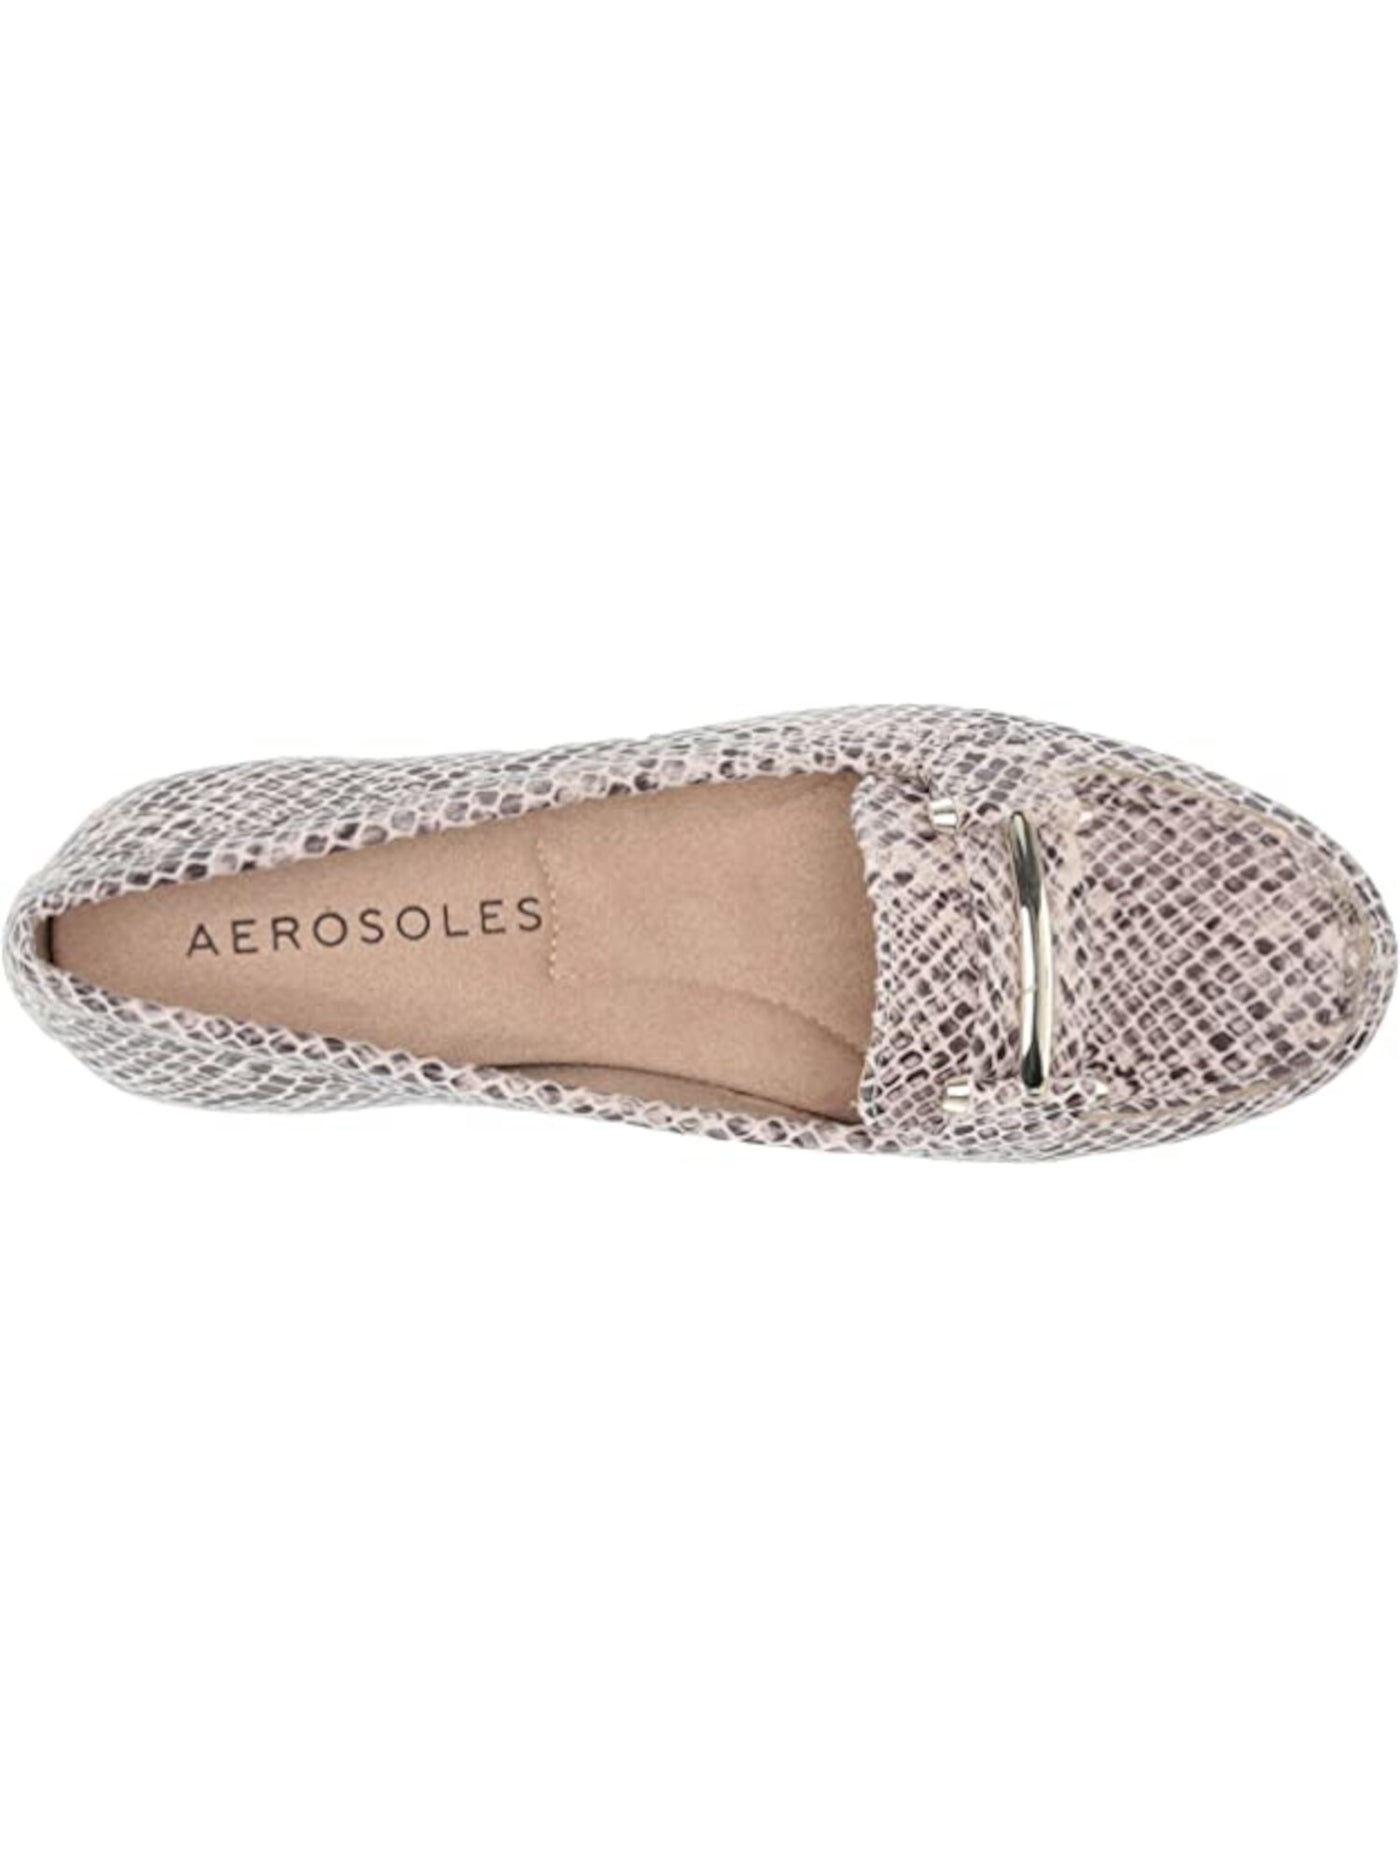 AEROSOLES Womens Beige Snake Bar Detail Cushioned Dansville Round Toe Slip On Loafers Shoes M